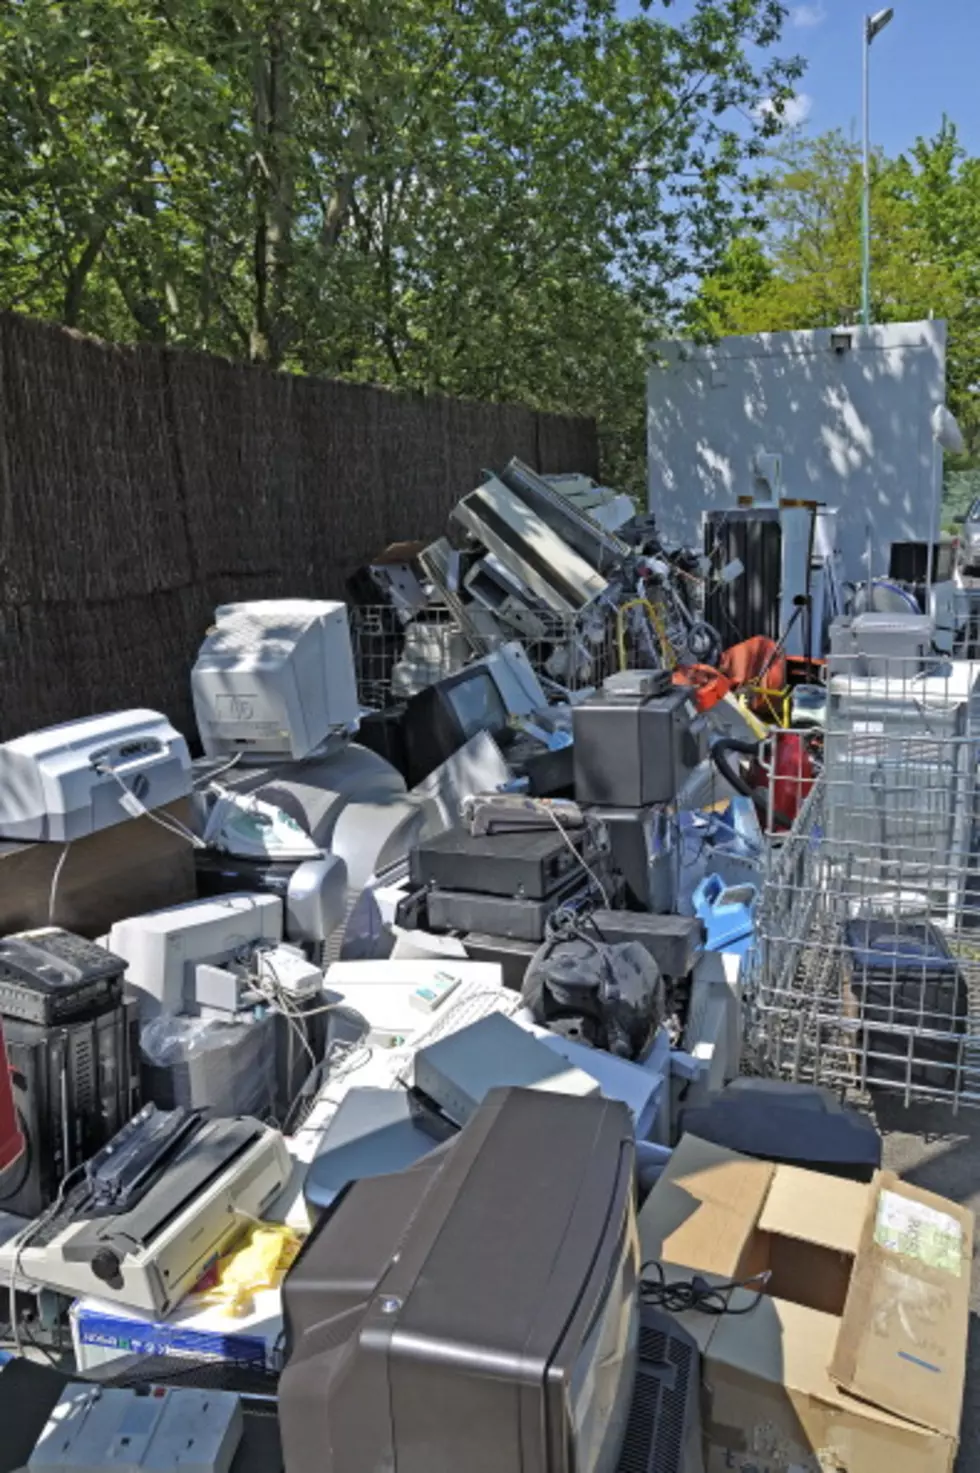 Electronics Waste Collection In Bangor